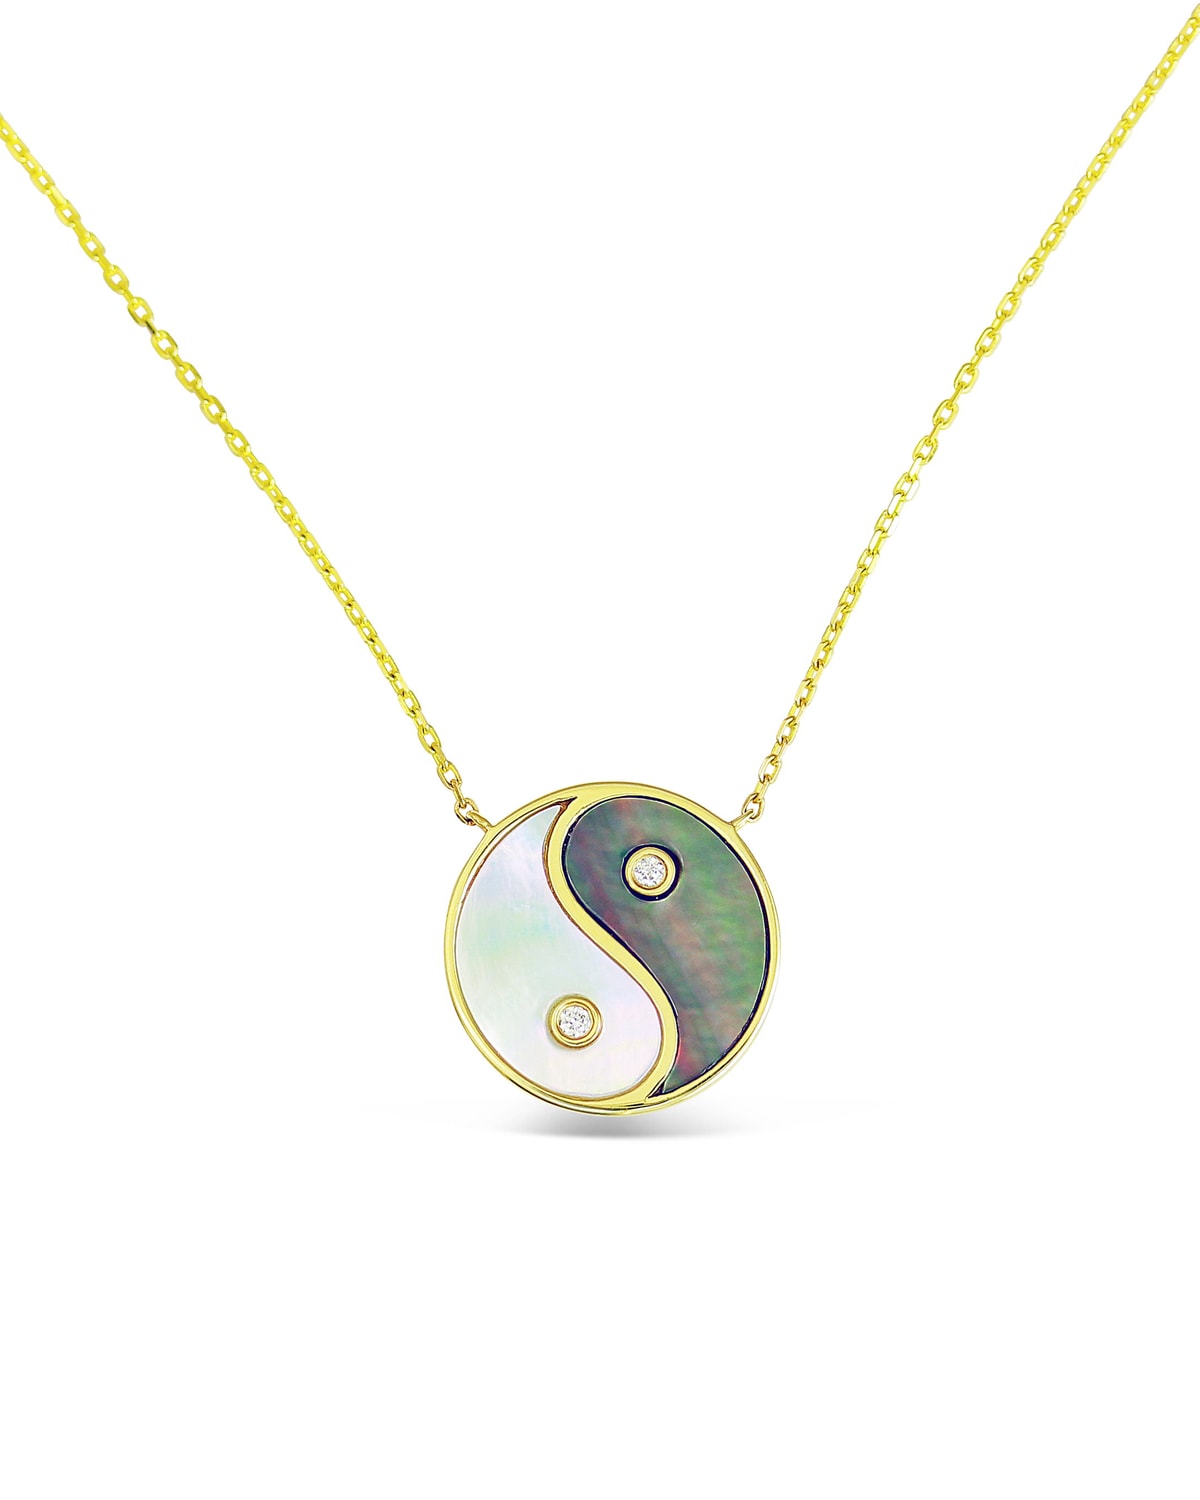 Frederic Sage 18k Gold & Mother-of-Pearl Yin Yang Pendant Necklace